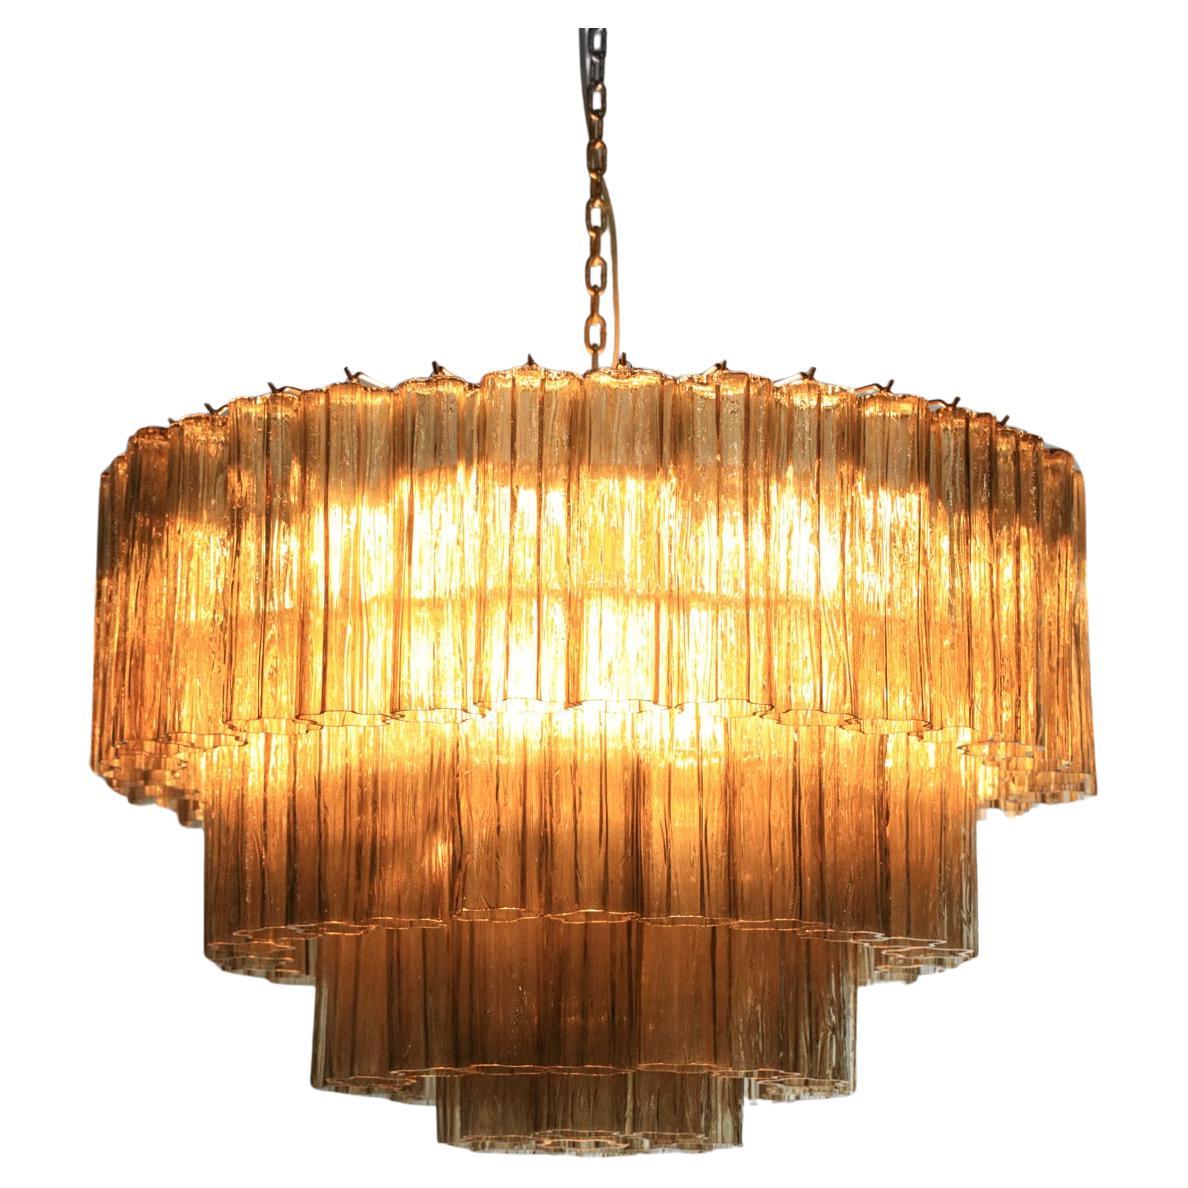 Large contemporary chandelier made by our Italian craftsman. Chrome-plated metal structure. Composed of smoked glass tubes. The chandelier is presented as a pendant, but can also be used as a ceiling light. E14 LED bulbs (15W) dimmable or